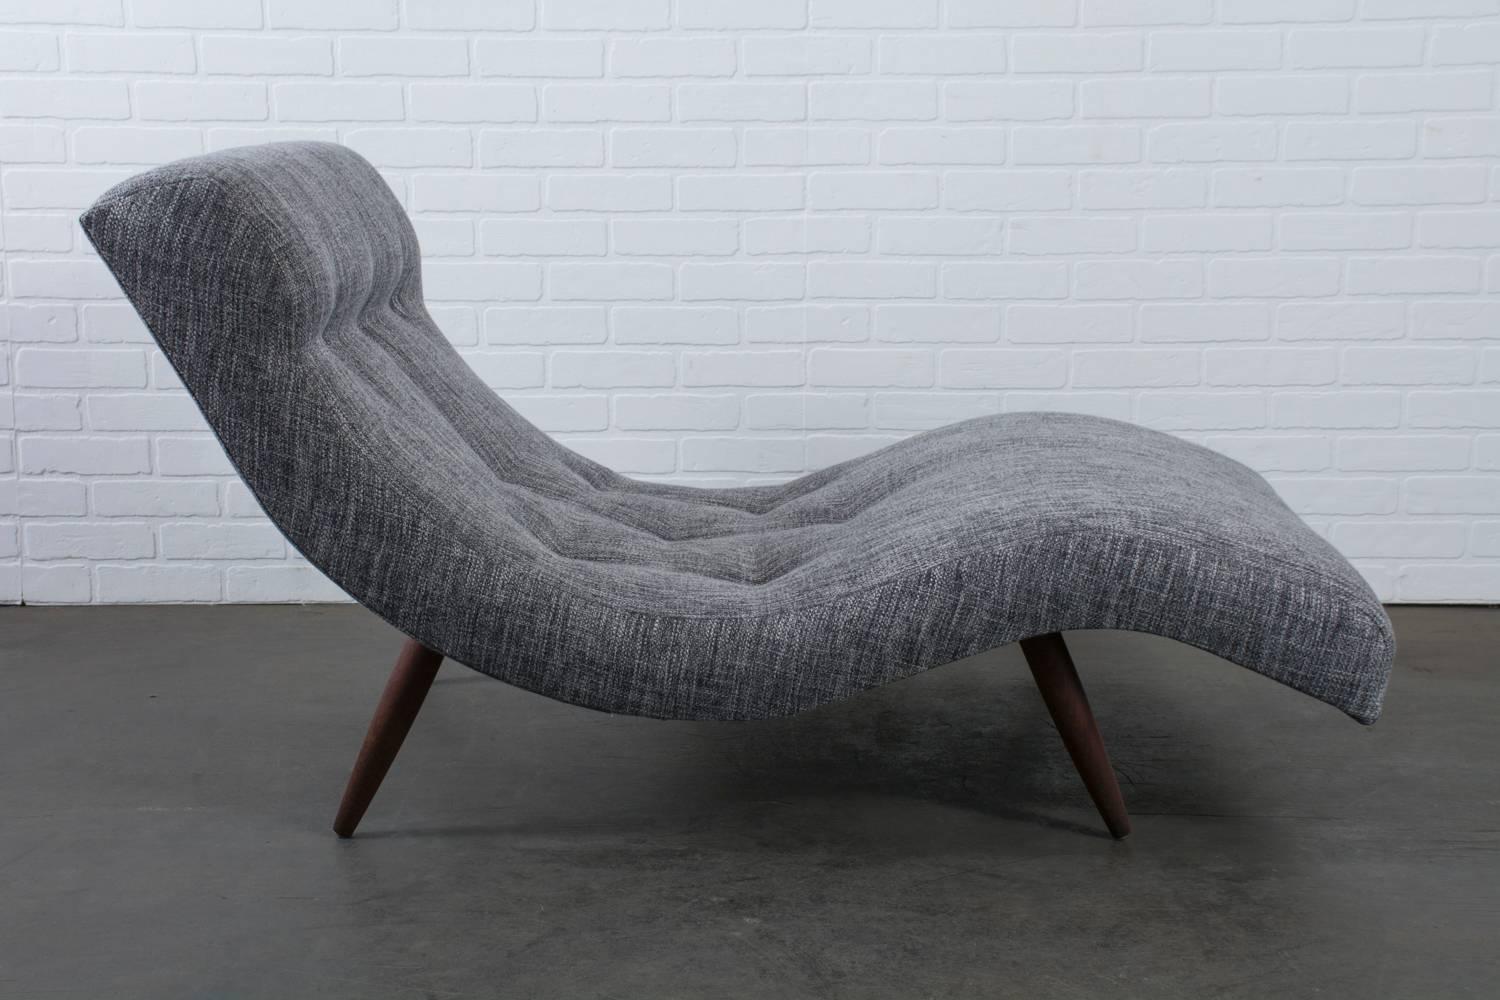 This Mid-Century Modern chaise longue was designed by Adrian Pearsall for Craft Associates in the 1960s. This piece has been reupholstered in a grey textured fabric. The wave shape and thicker foam on the head rest give this chaise great lines and